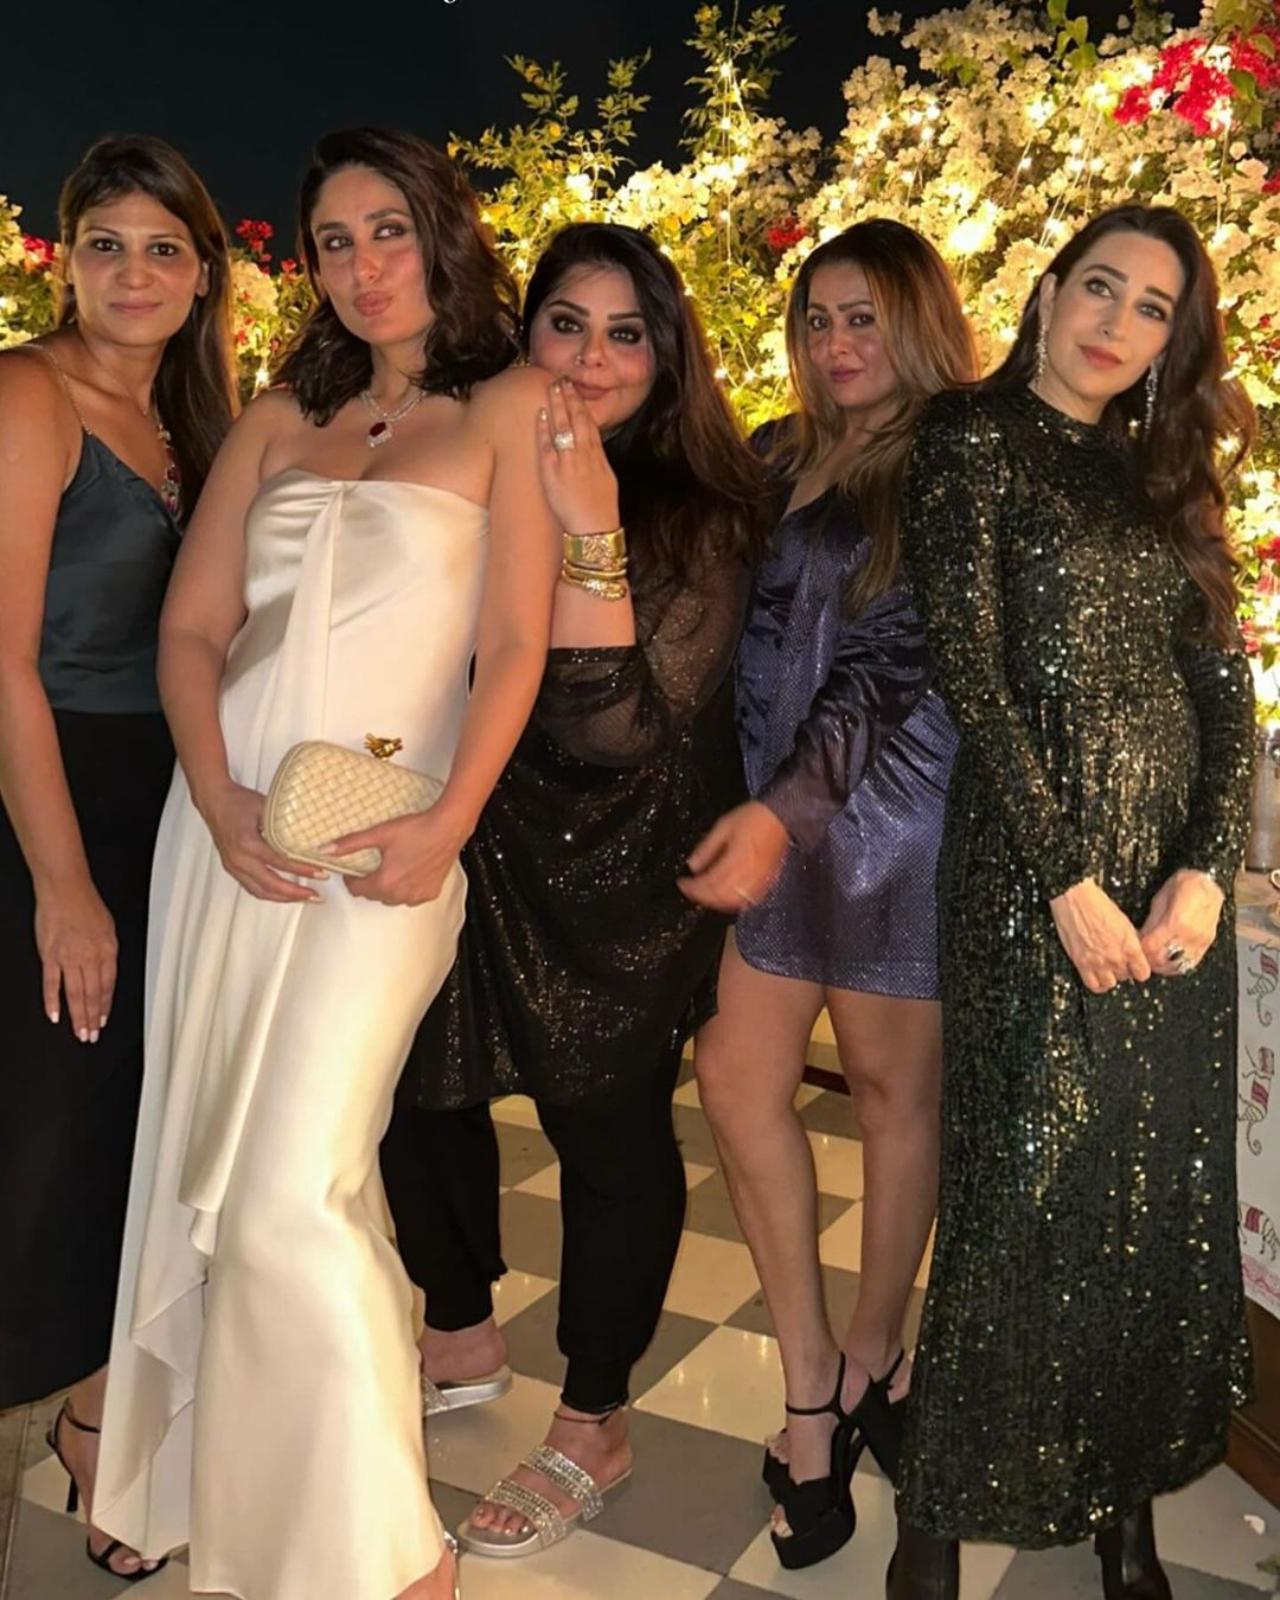 After getting ready, Kareena posted a picture last night posing with Karisma and Amrita Arora. The trio were seen leaving together for the party